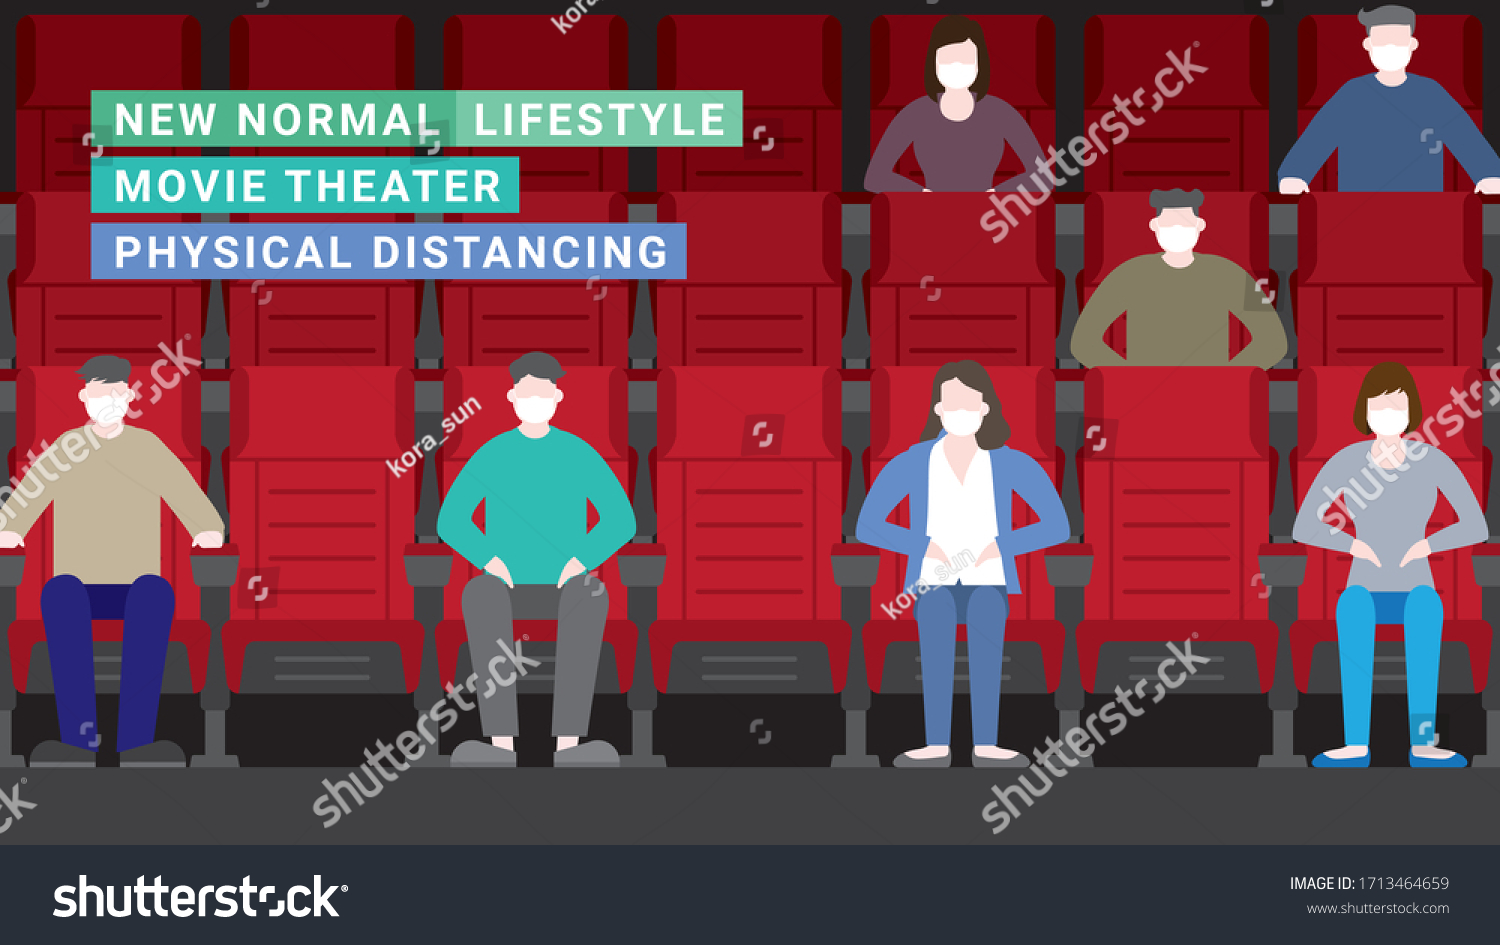 SVG of Movie theater lifestyle after pandemic covid-19 corona virus. New normal is social distancing and wearing mask. Flat design style vector concept svg